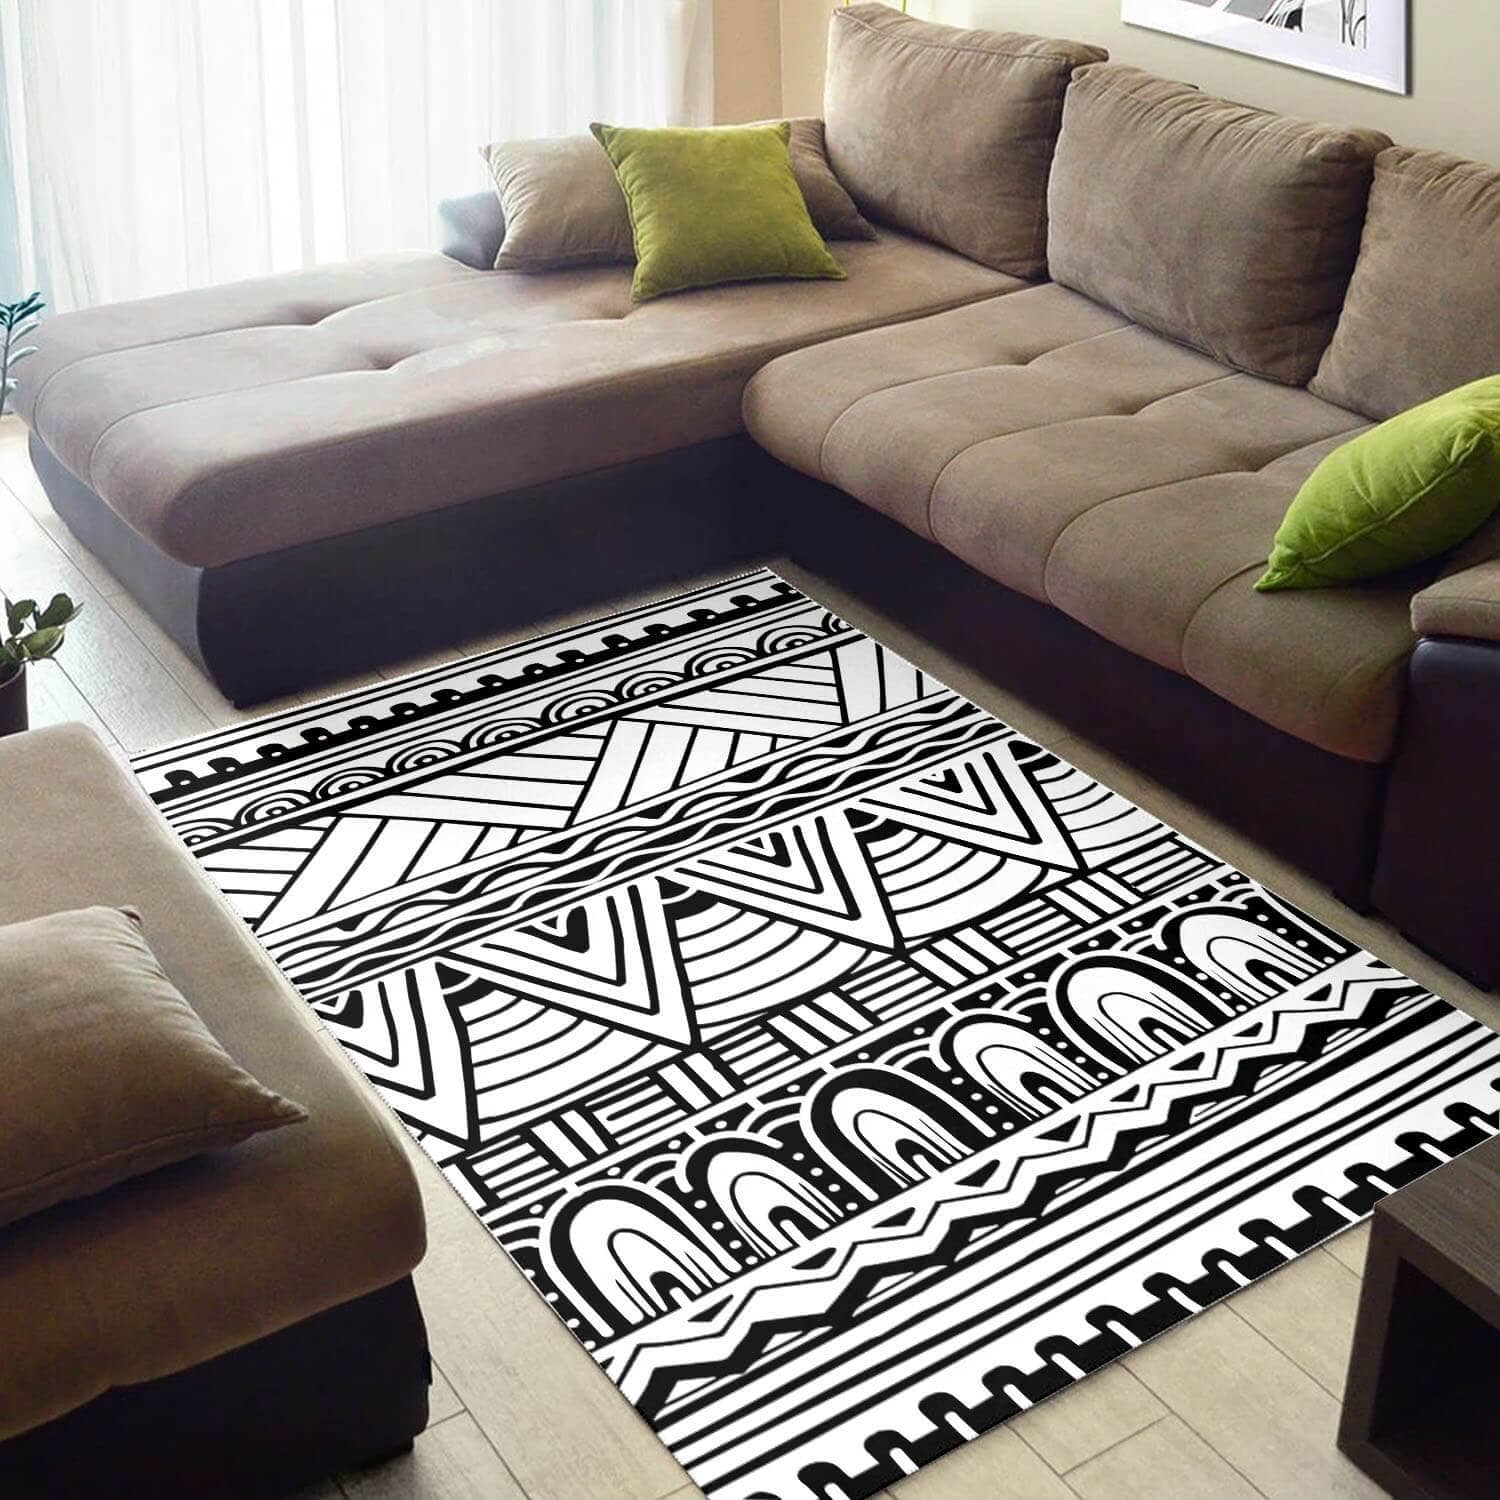 Trendy African Beautiful Black History Month Ethnic Seamless Pattern Style Carpet Living Room Rug